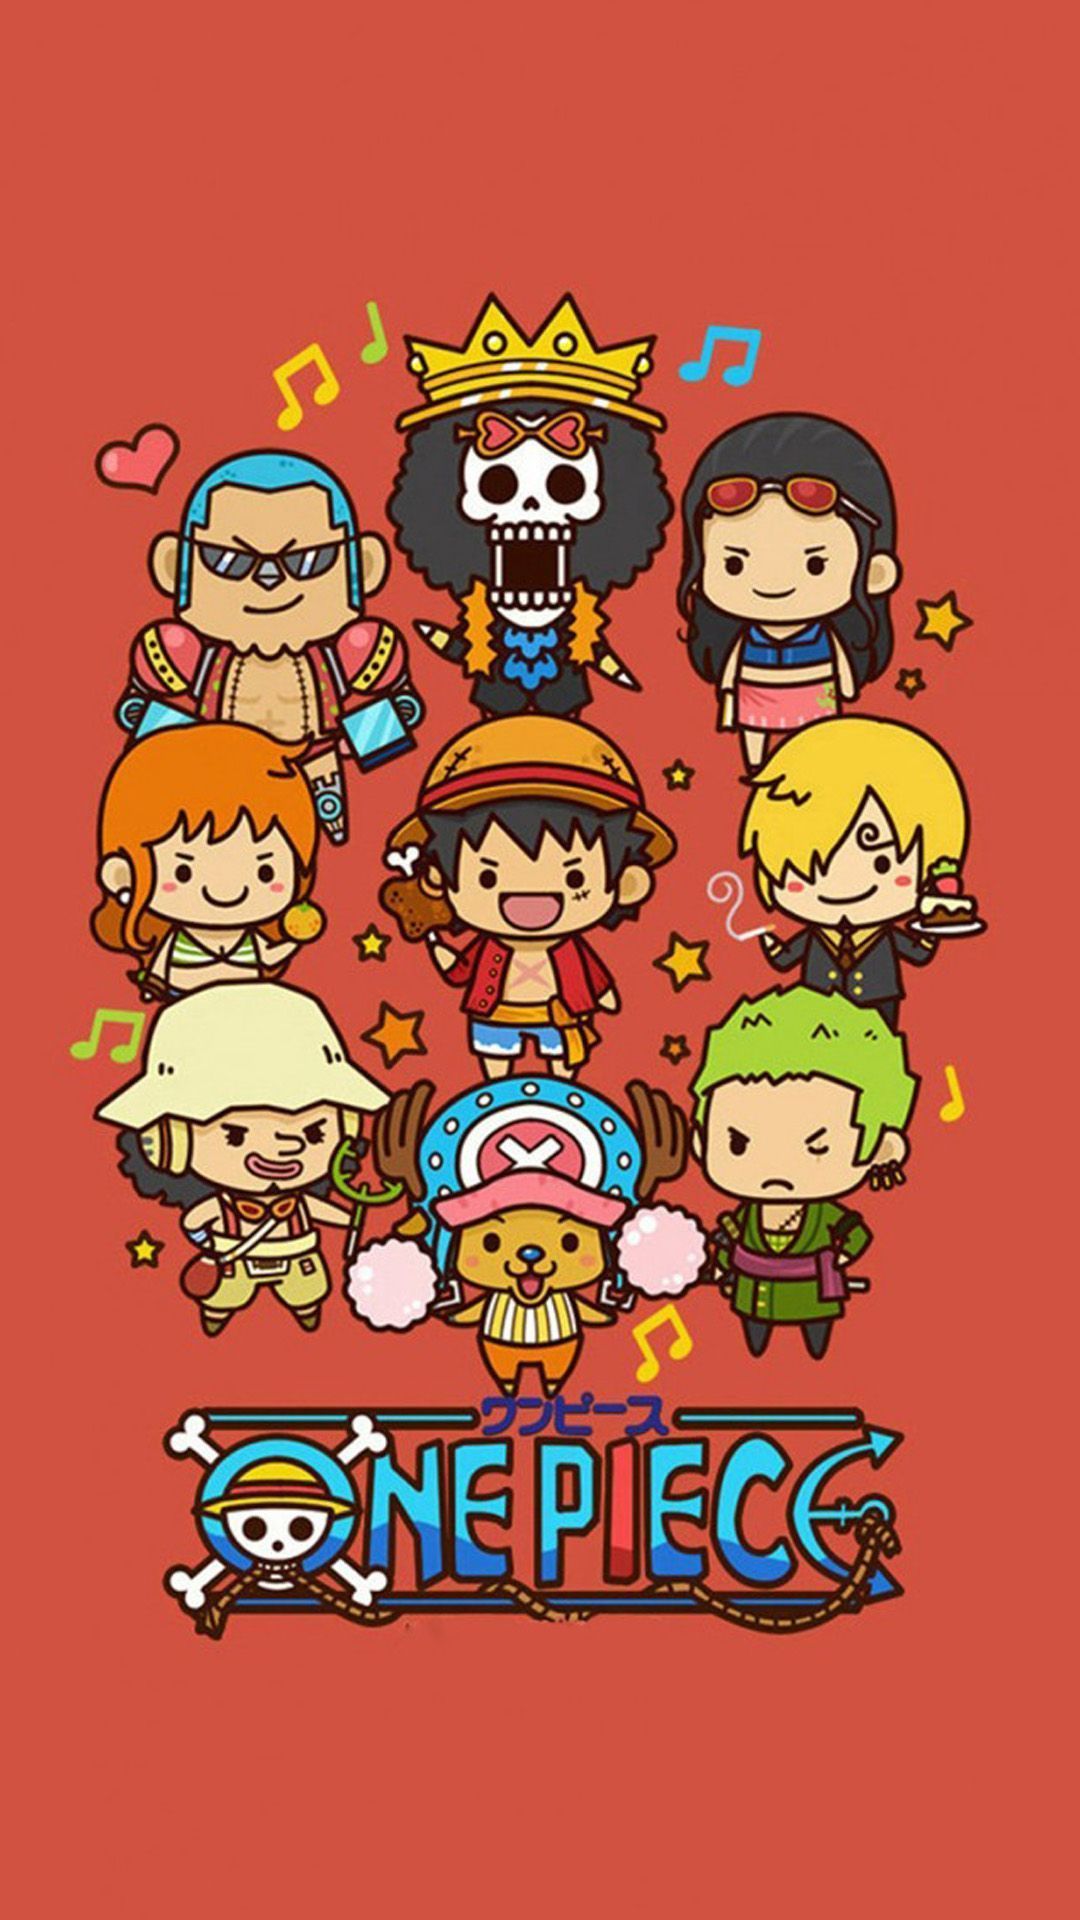 One Piece wallpaper for iPhone and Android! - One Piece